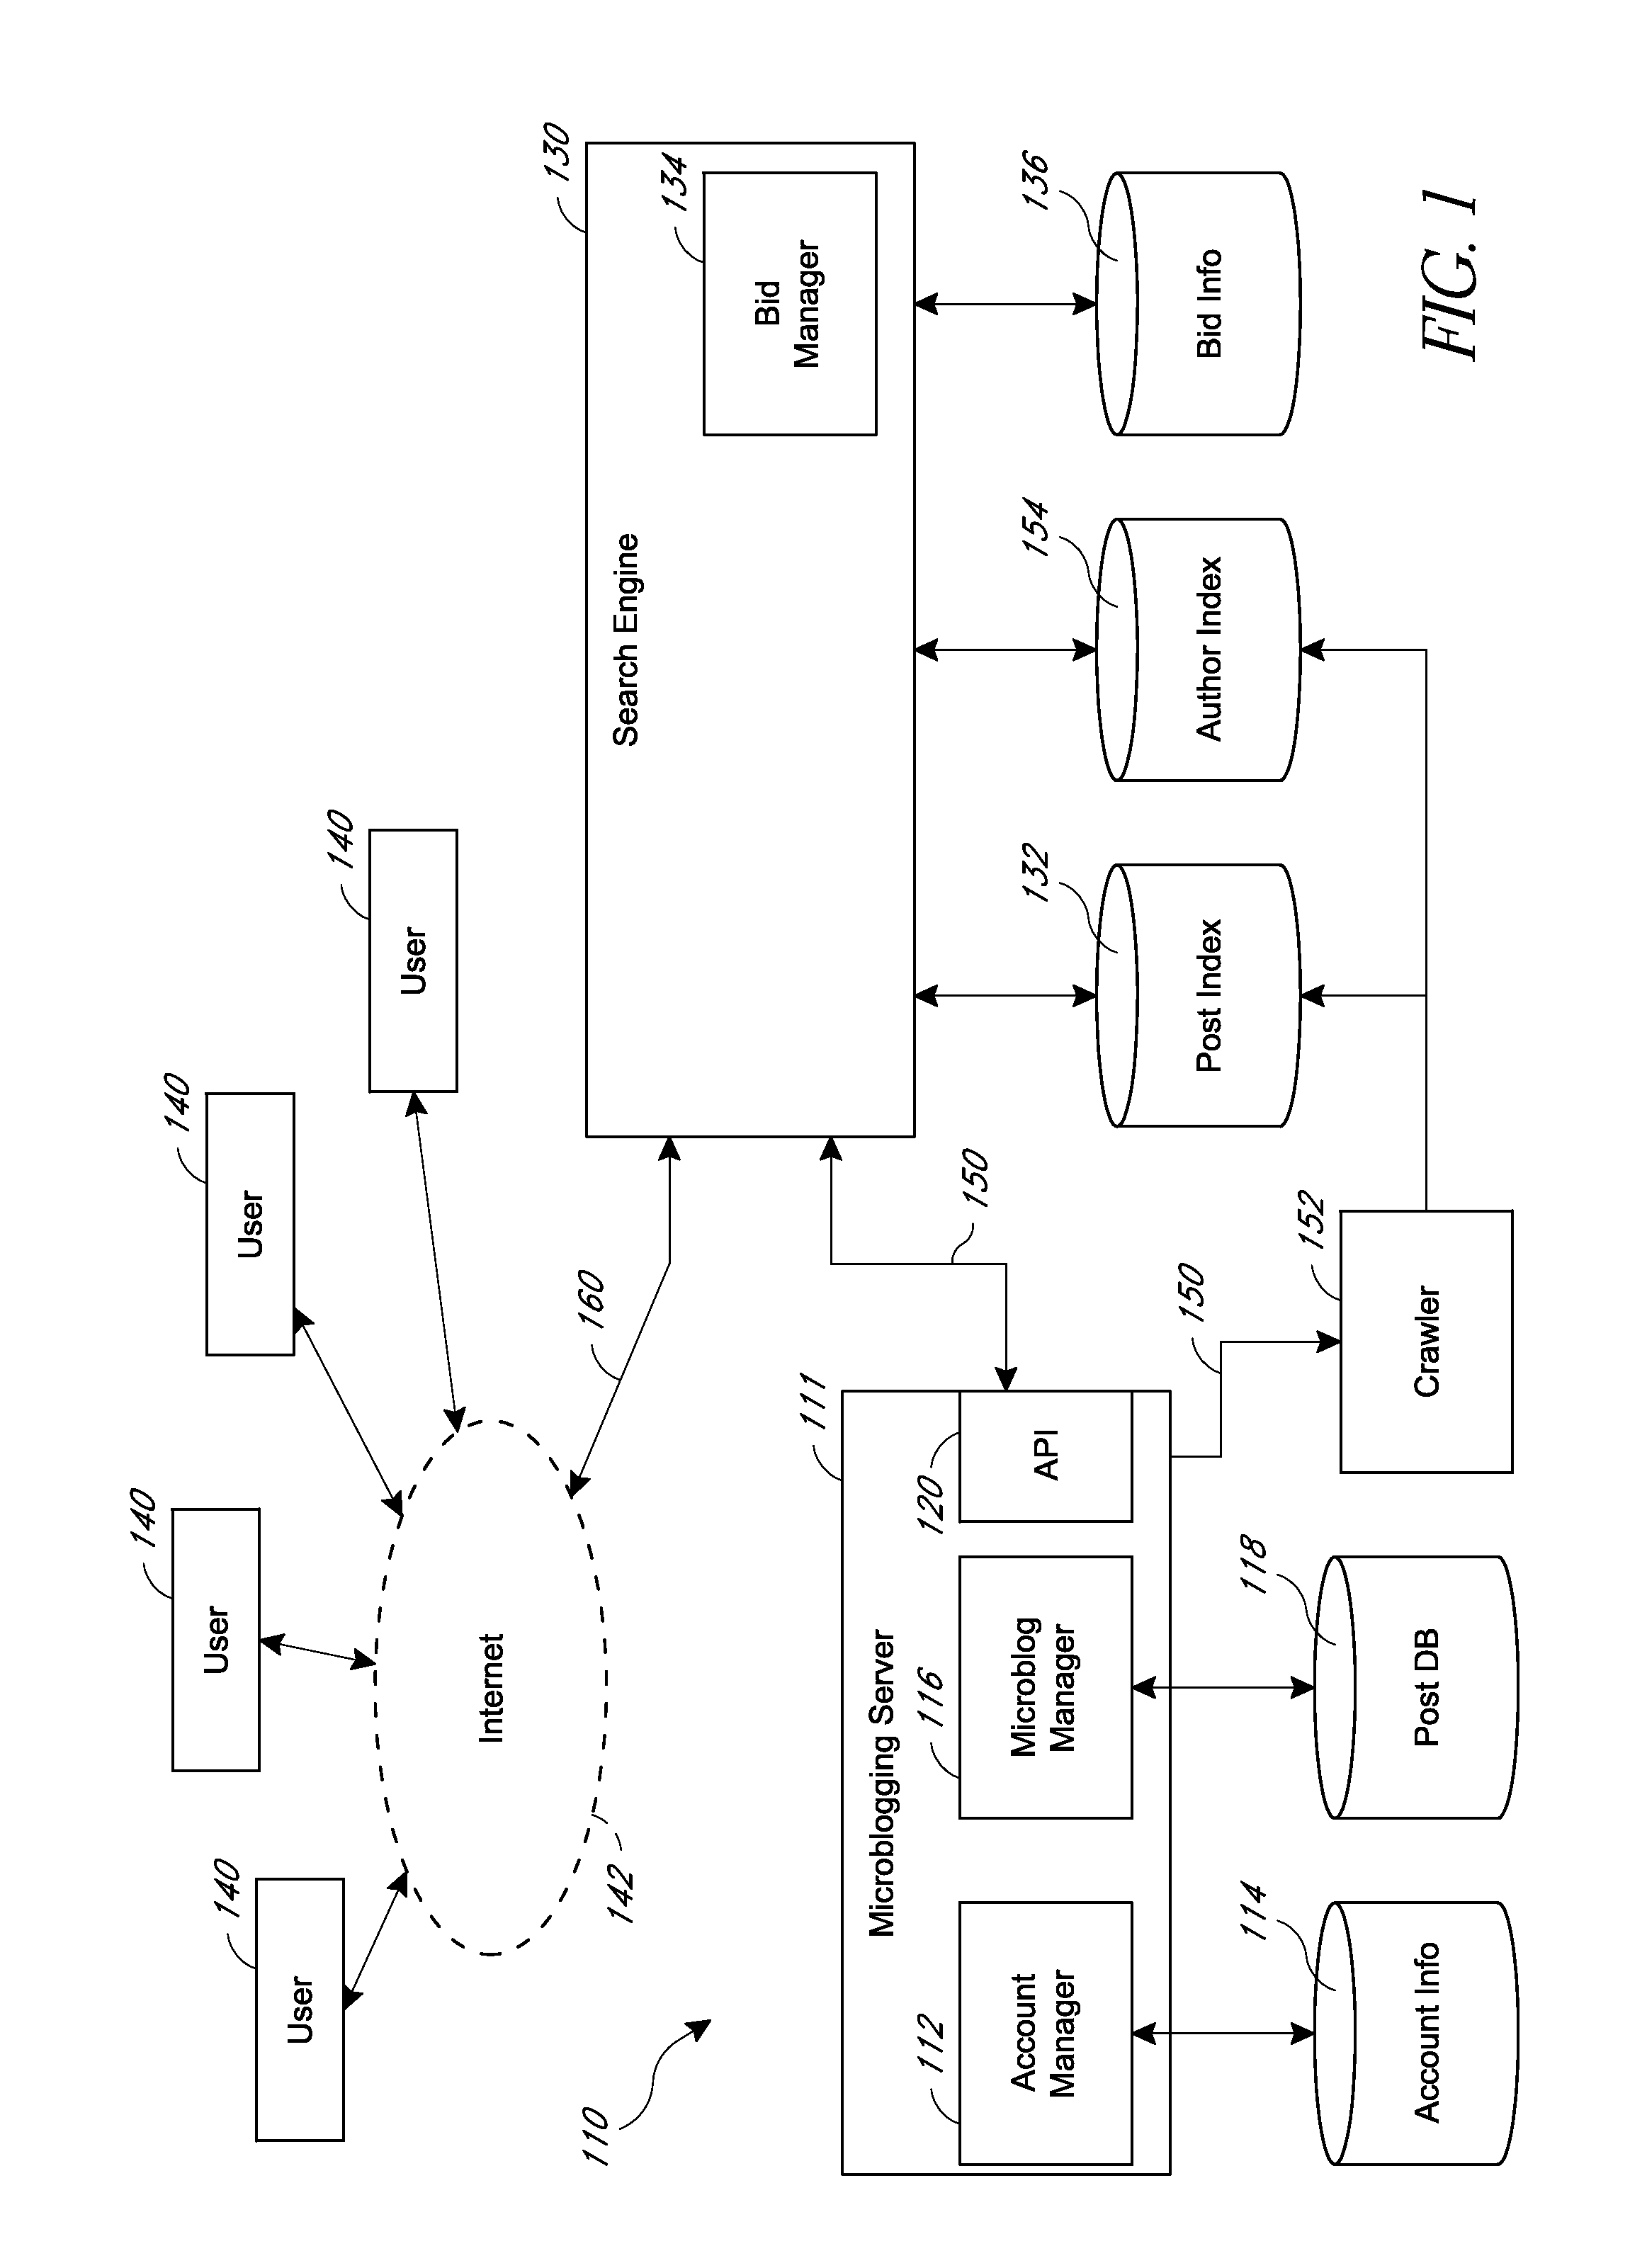 Systems and methods for interacting with messages, authors, and followers